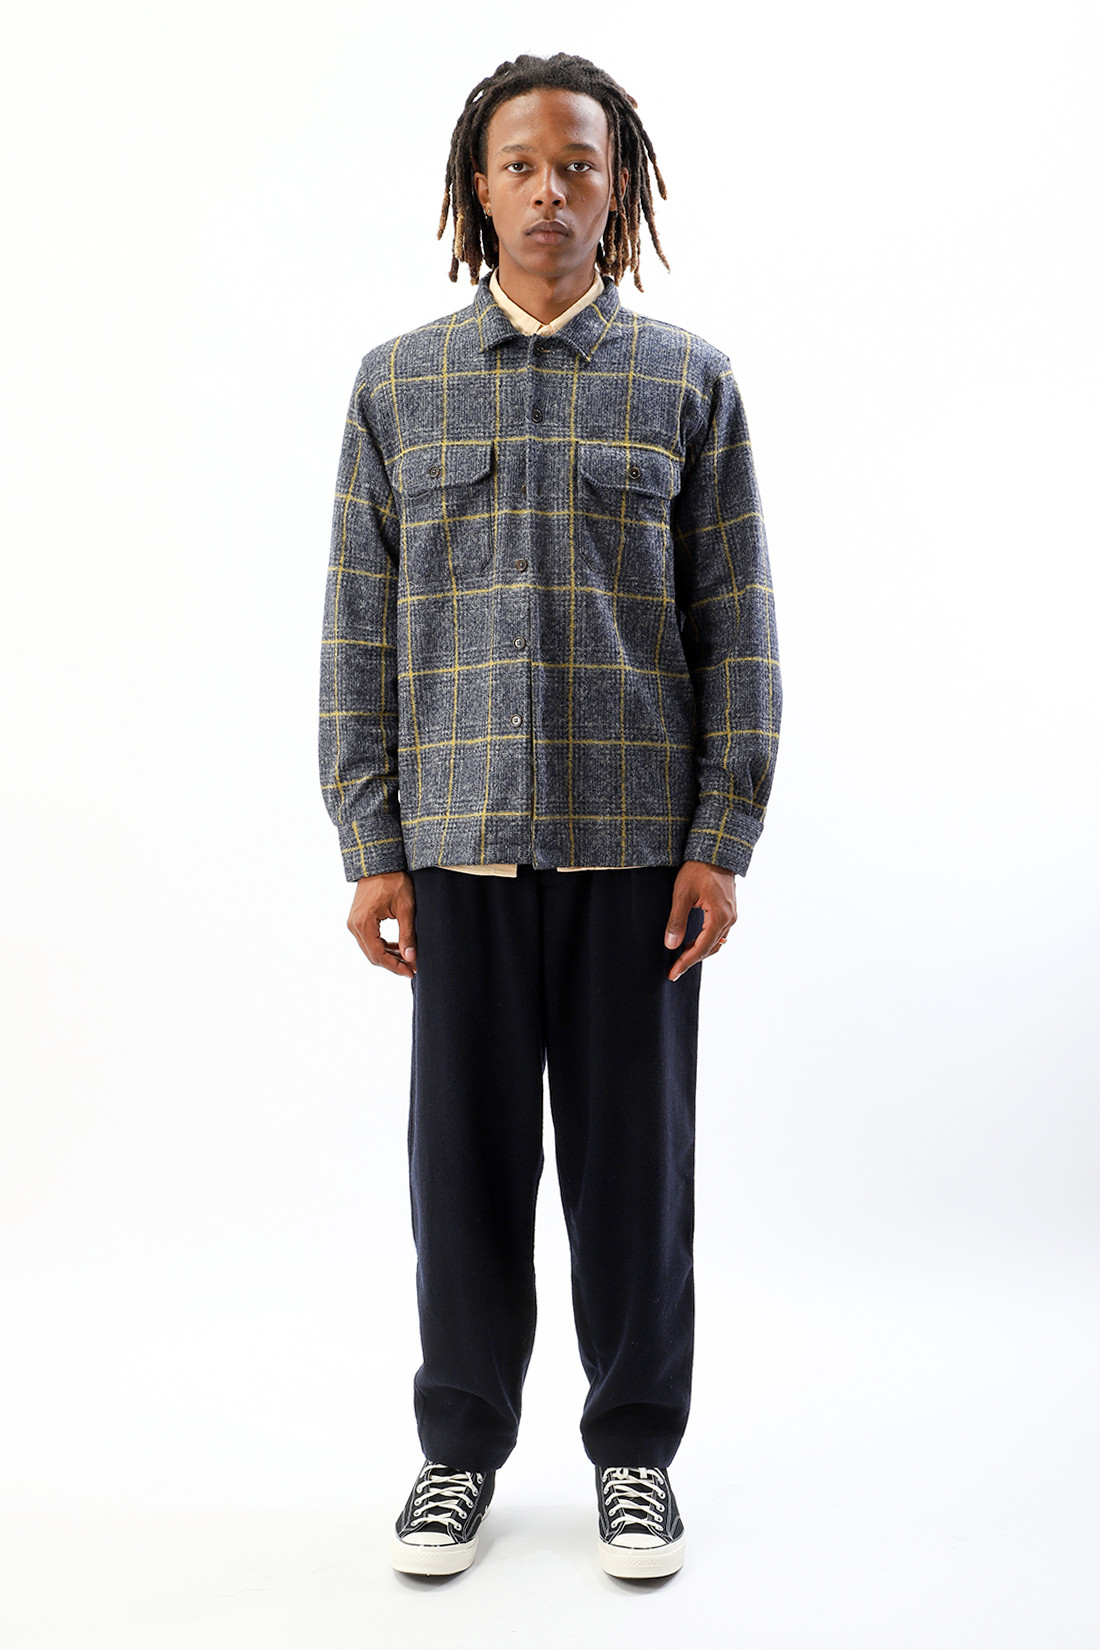 Pleated track pant soft wool Navy